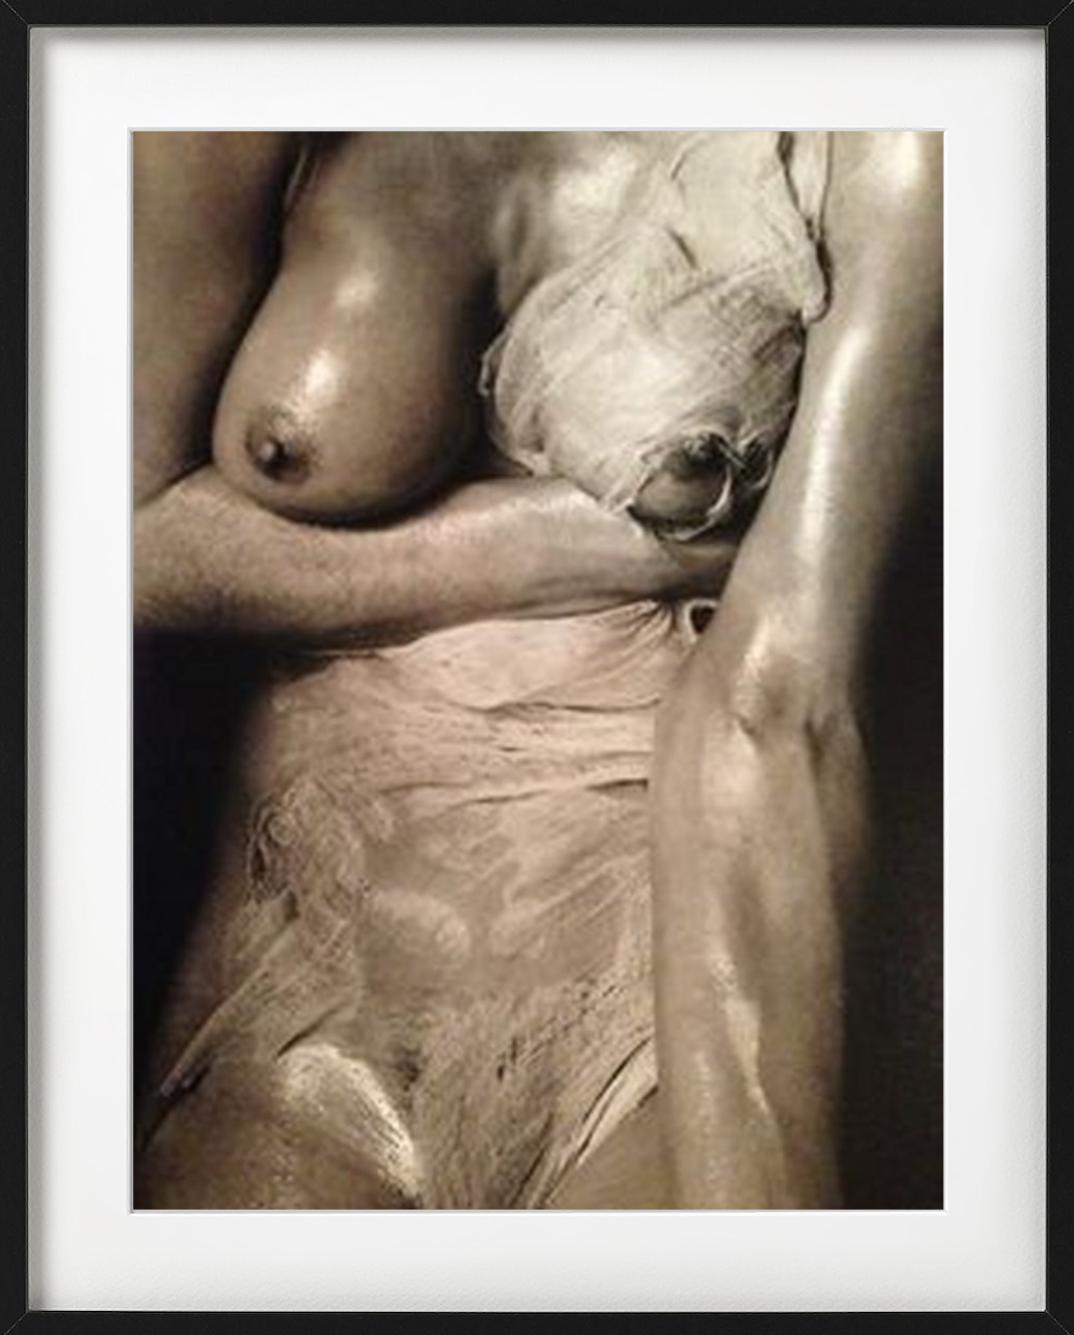 Rachel Williams - nude torso covered in ripped fabric, fine art photography 1995 - Photograph by Albert Watson